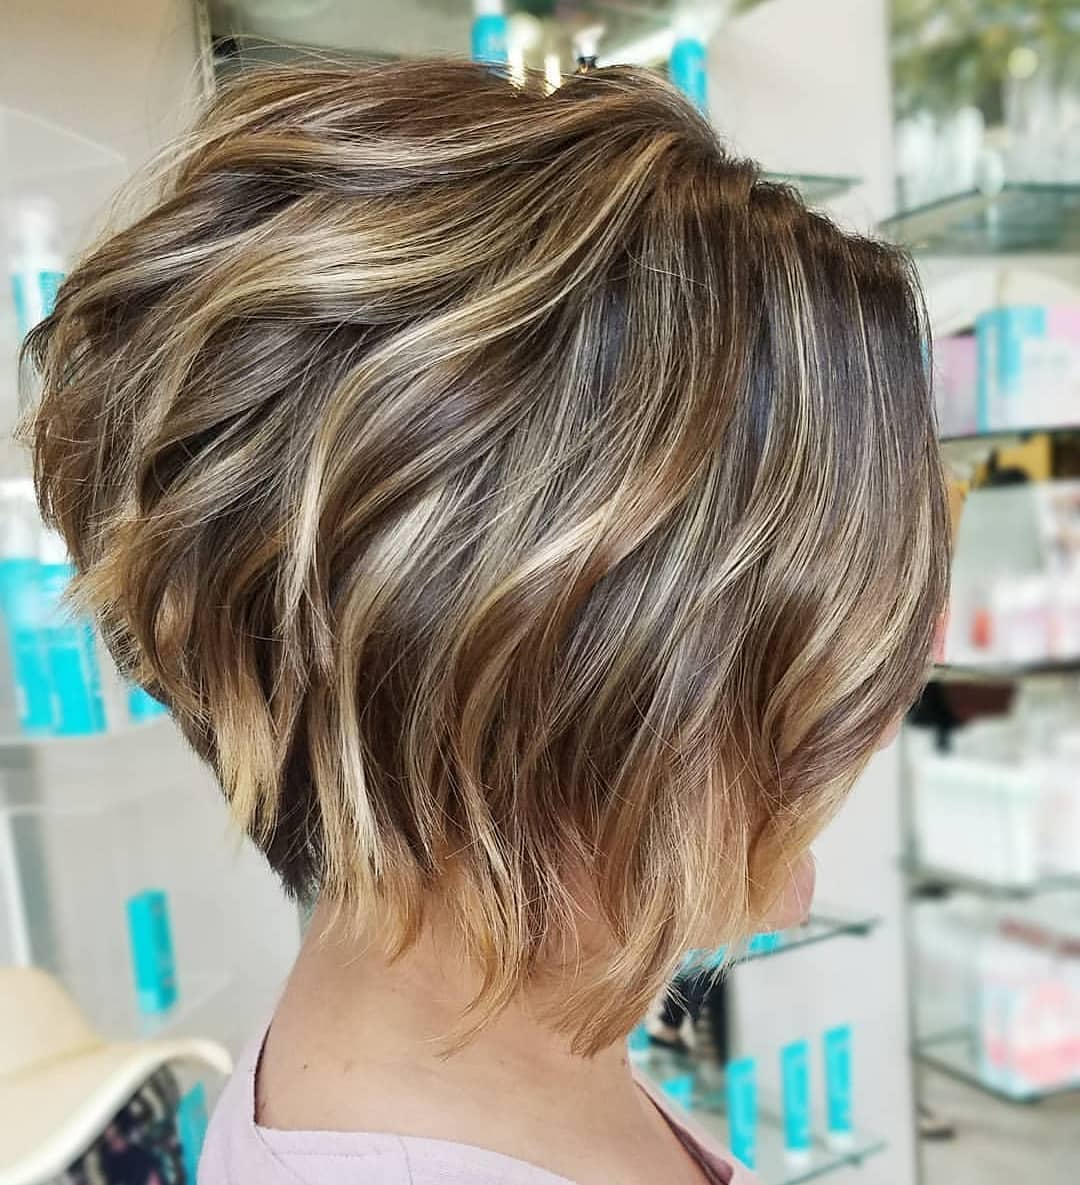 20 Cool and Cute Stacked Bob Haircuts for Women - Haircuts & Hairstyles ...